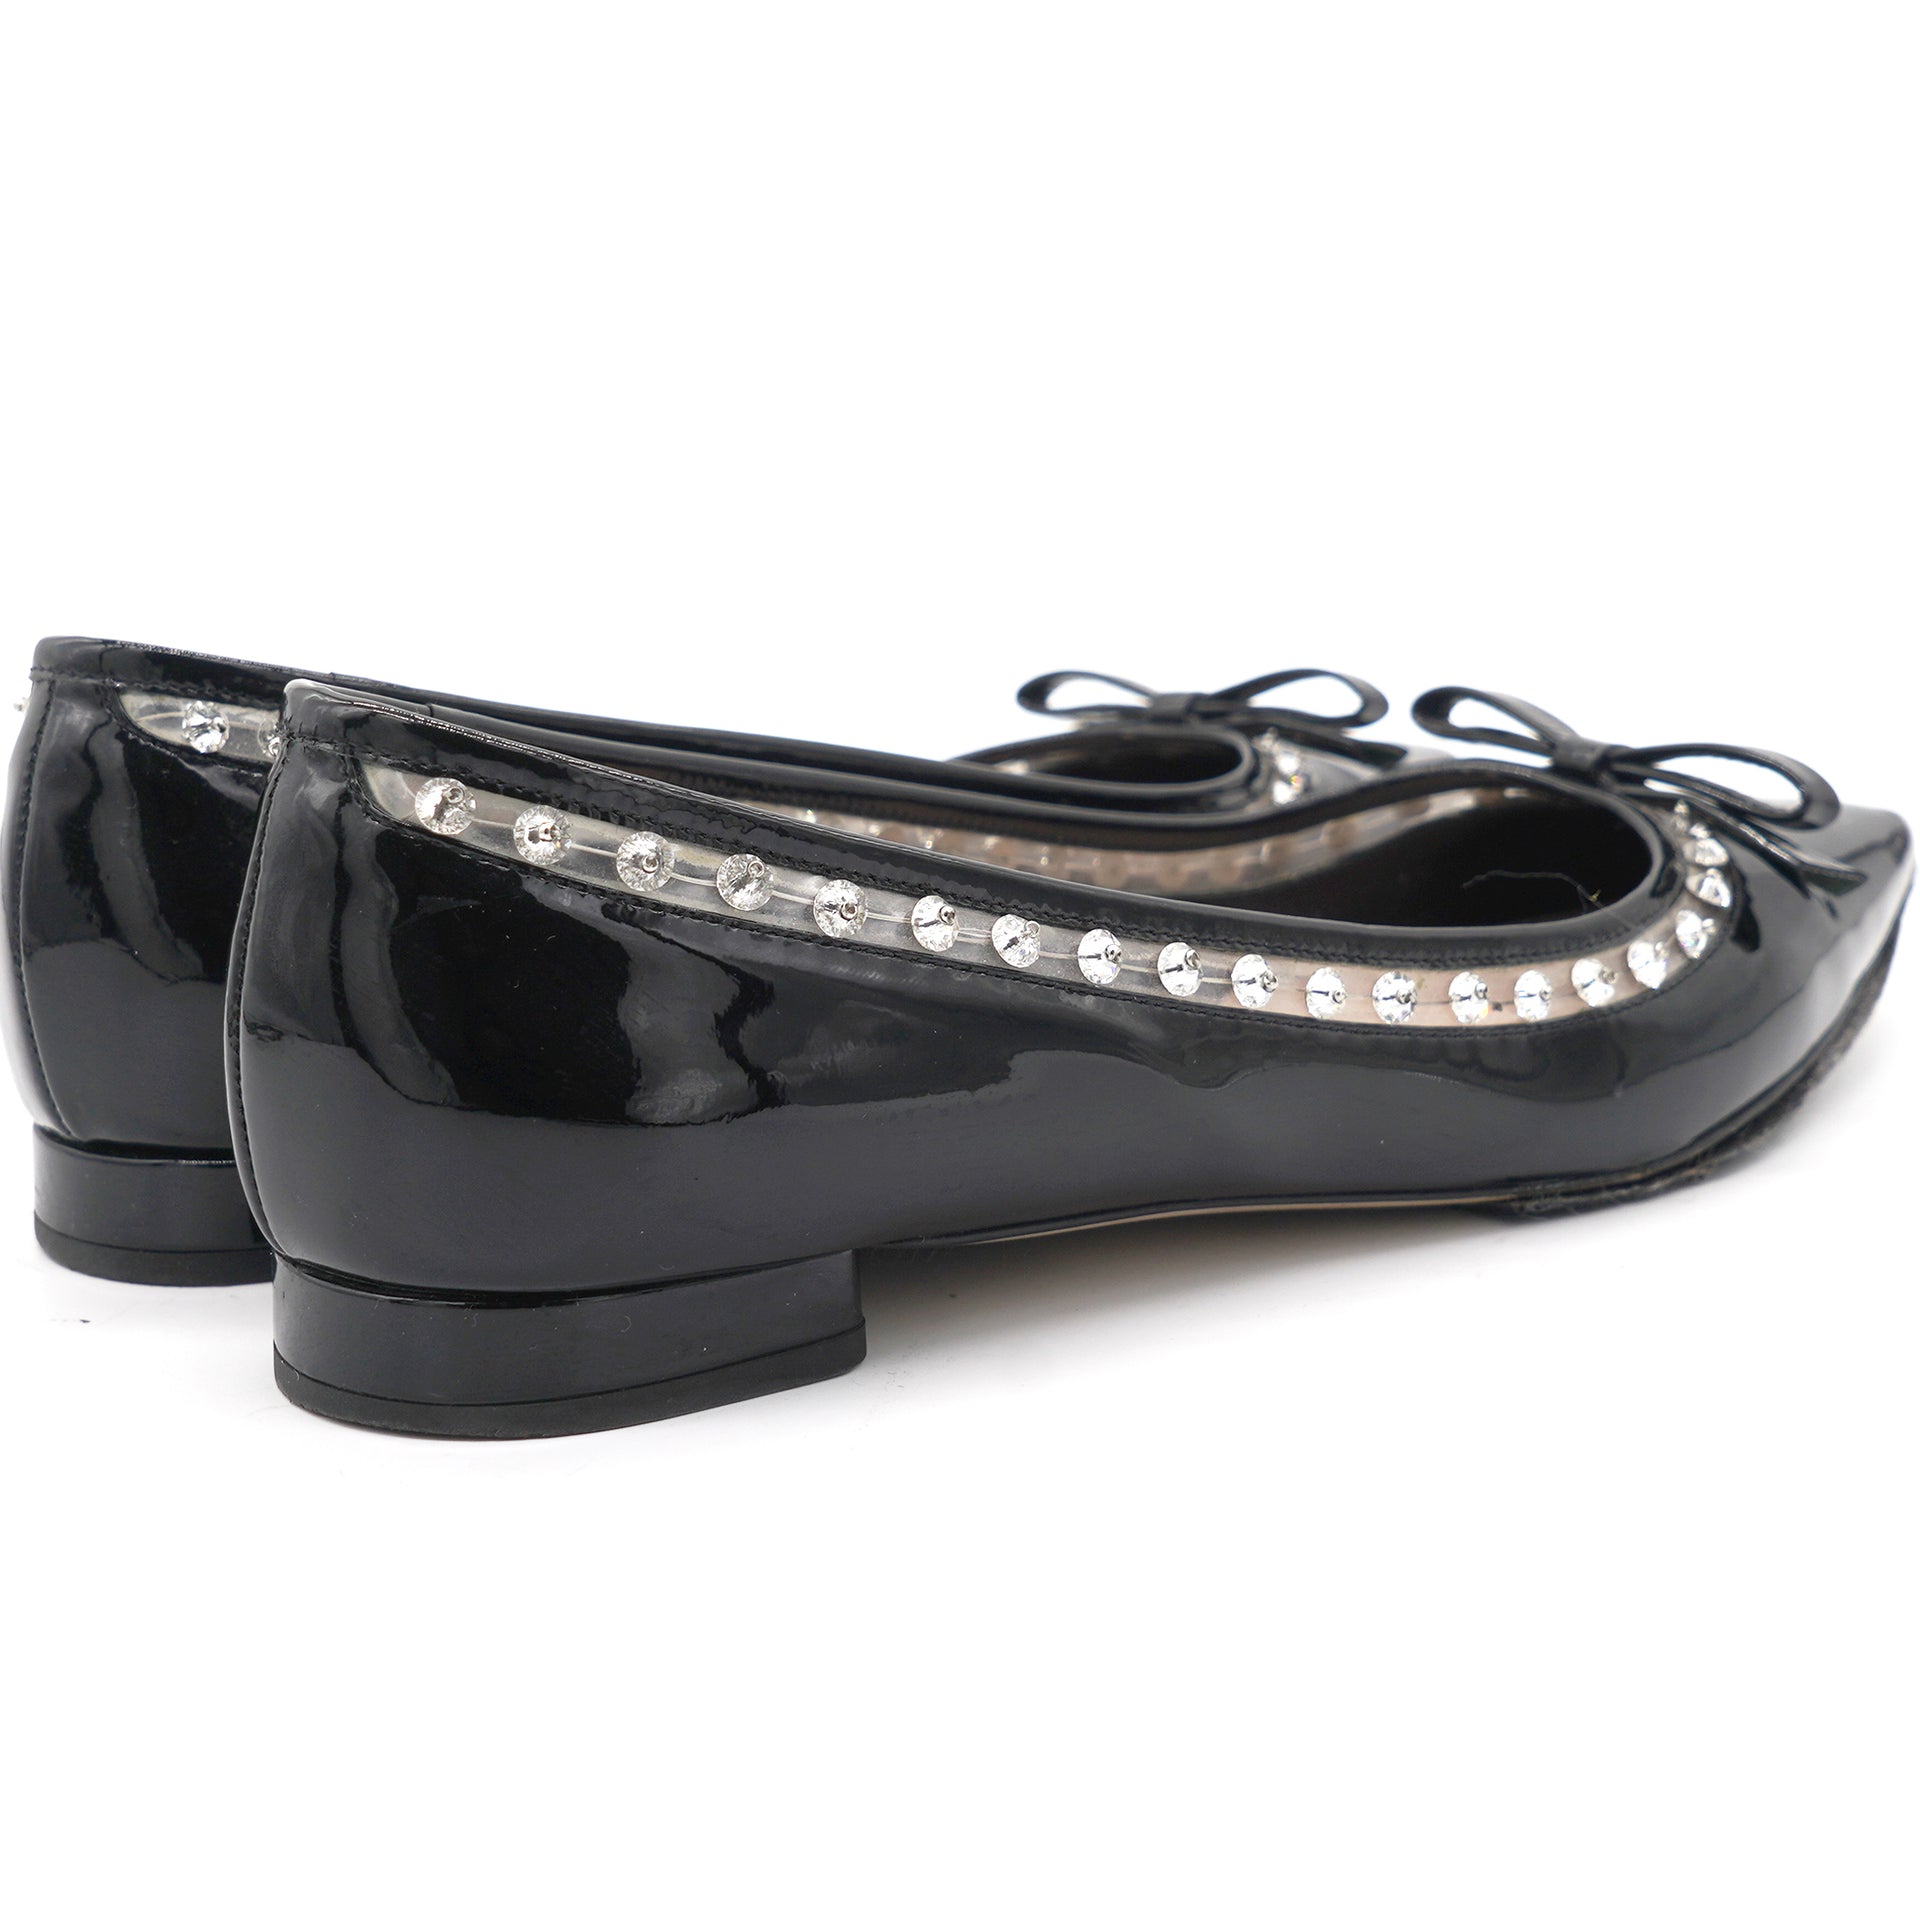 Black Patent Leather Studded Bow Pointed-Toe Flats 38